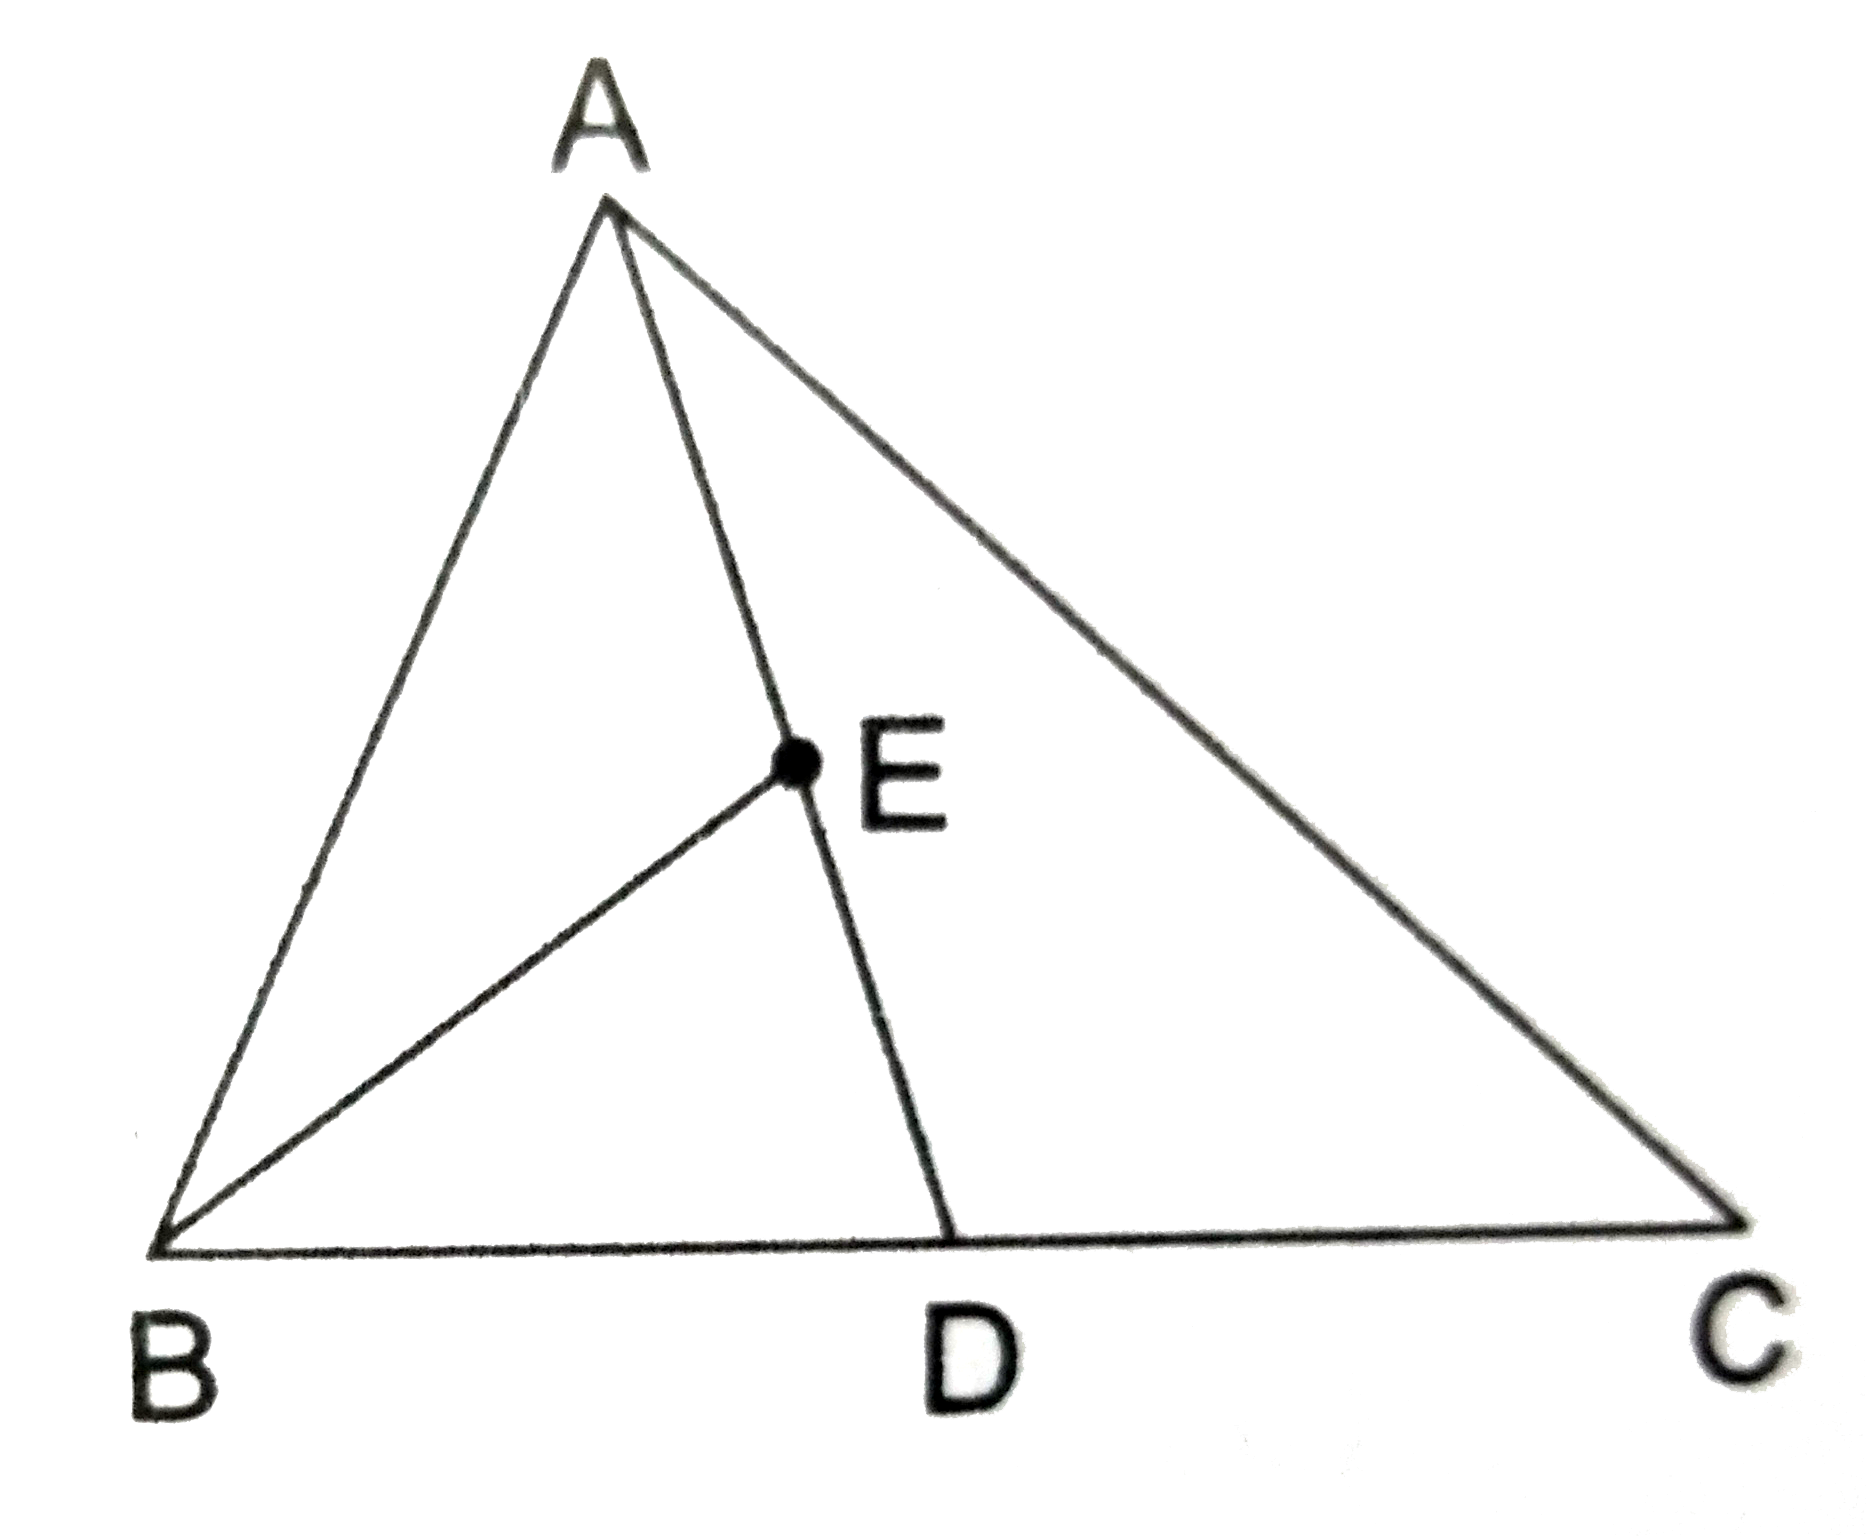 In triangleABC, if D is the midpoint of BC and E is the midpoint of AD then ar(triangleBED) = ?